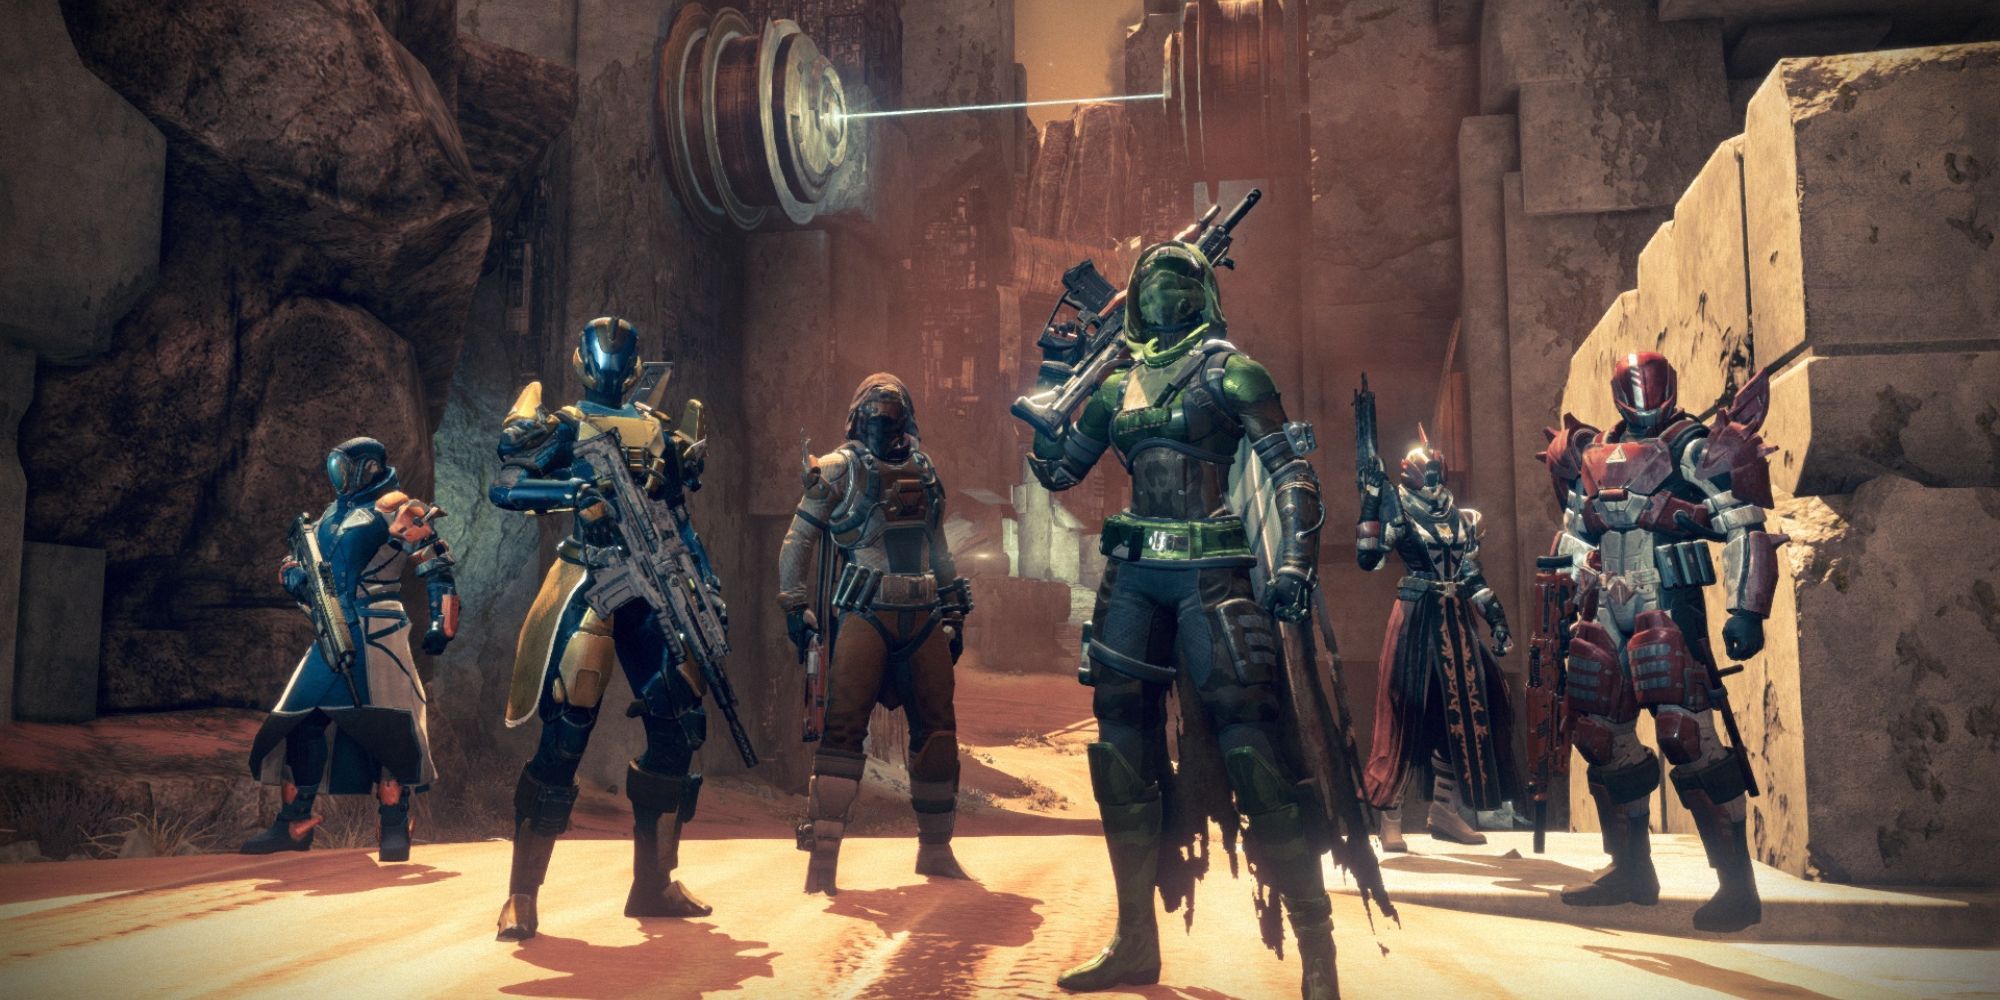 Screenshot of Destiny featuring characters